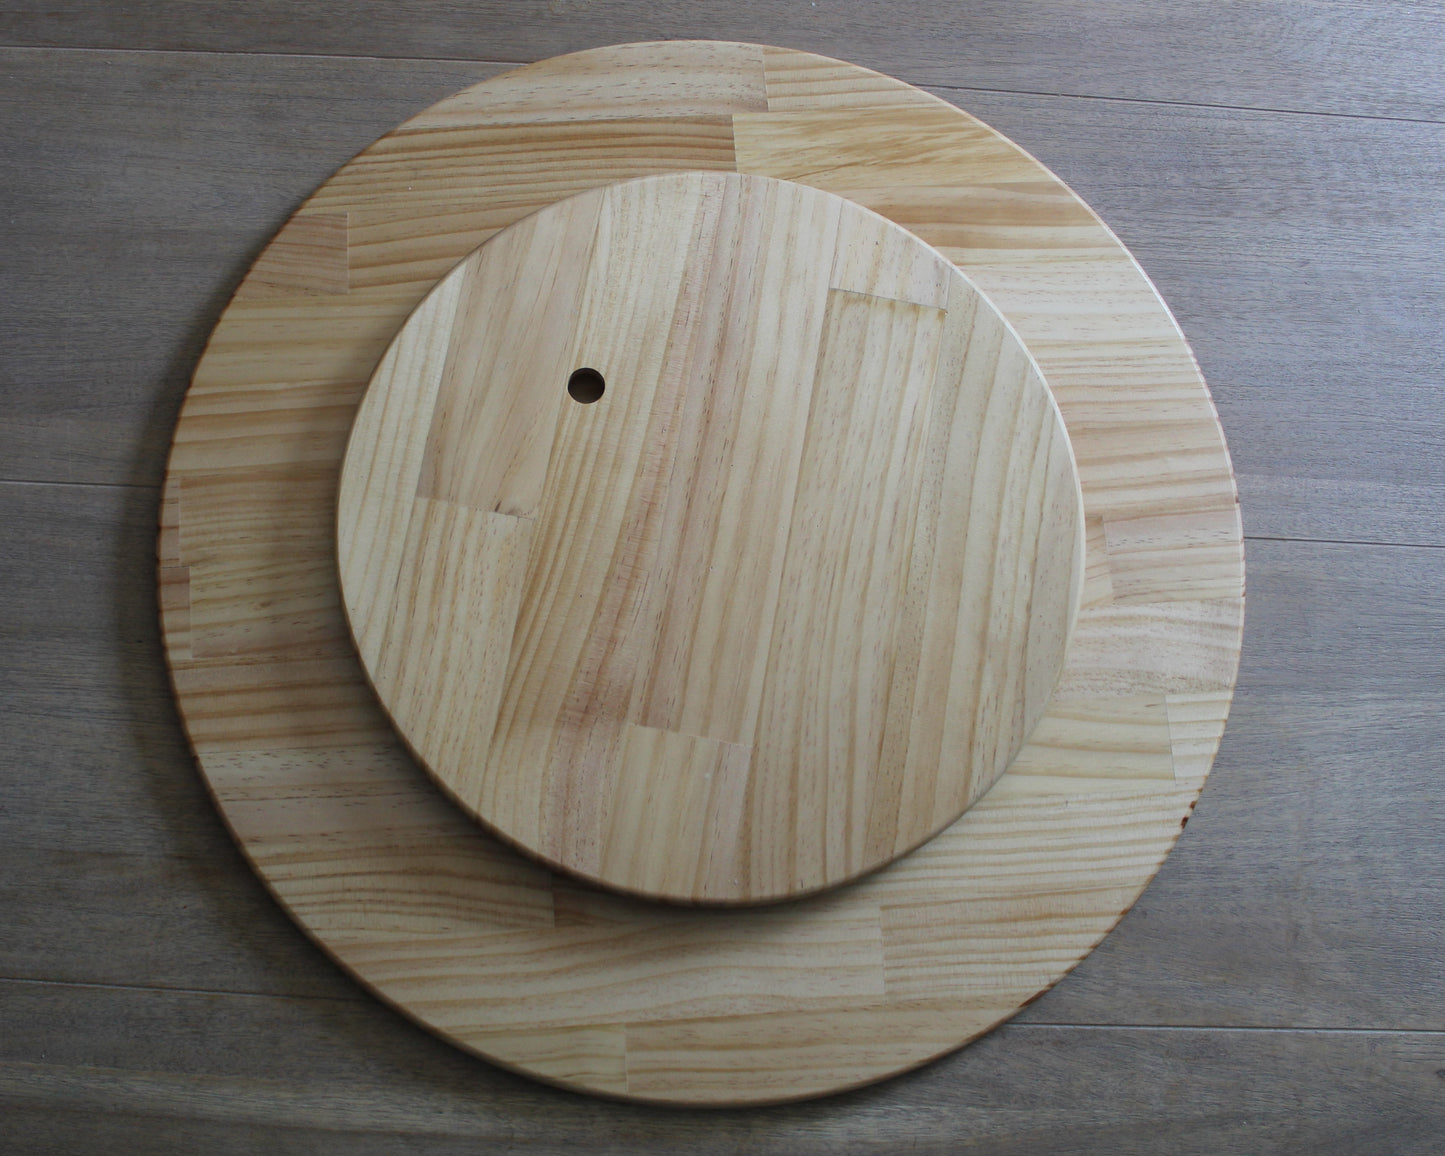 Lazy Susan Life Happens Around the Table - extra large 60cm